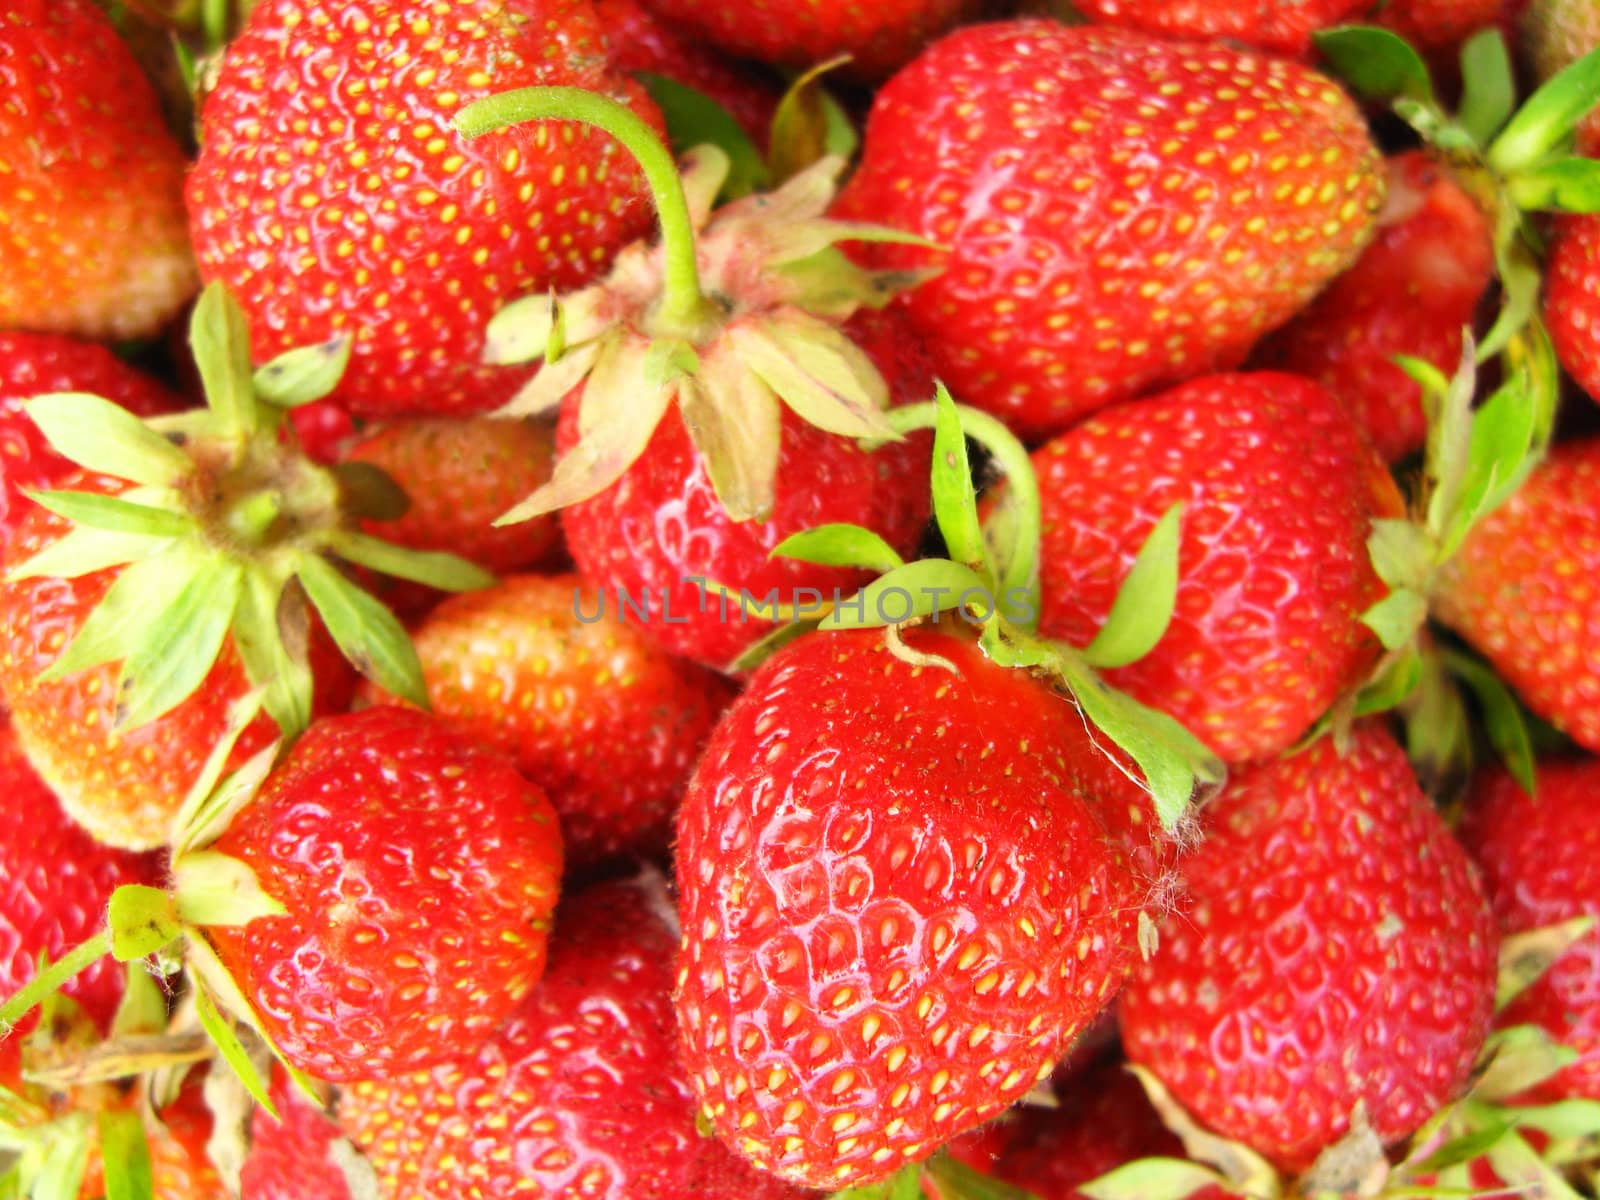 Many fine berries of a fresh strawberry